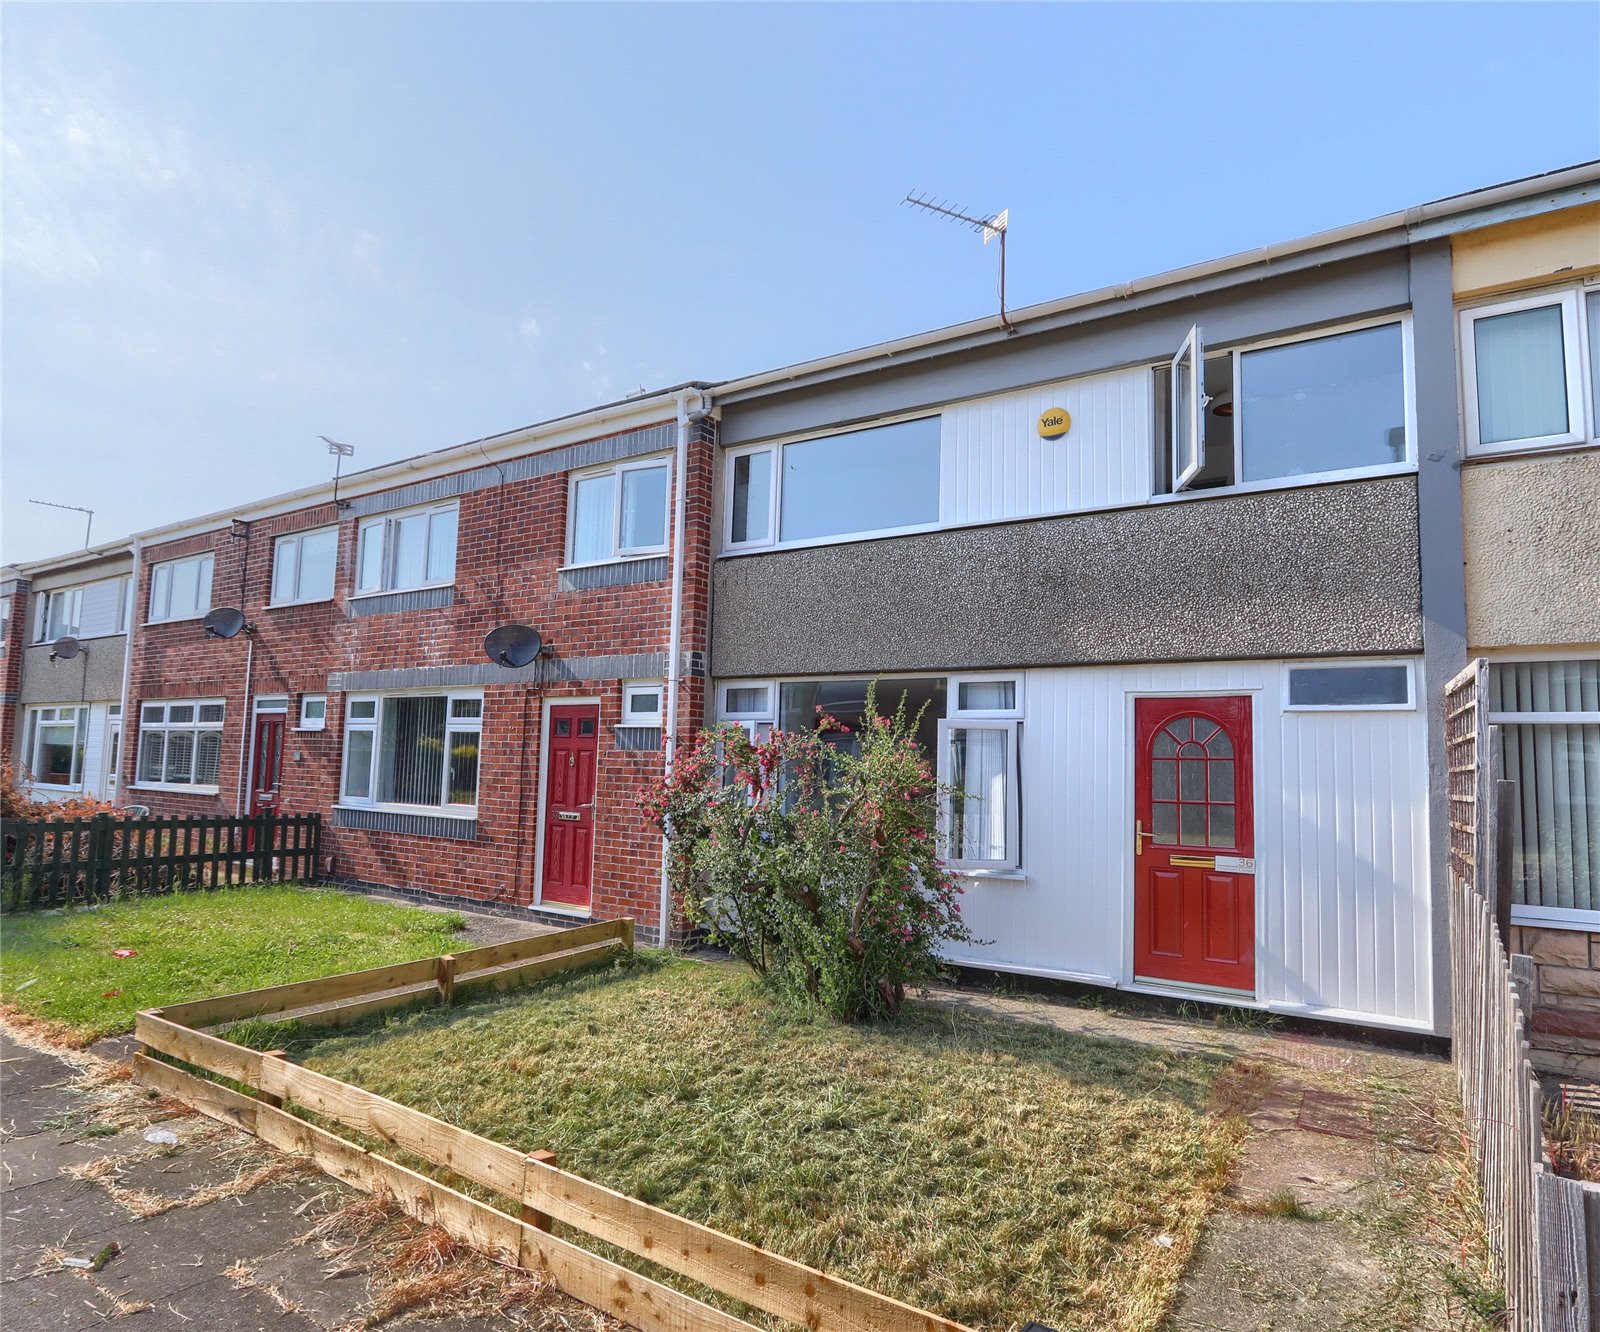 3 bed house for sale in Cropton Close, Redcar - Property Image 1